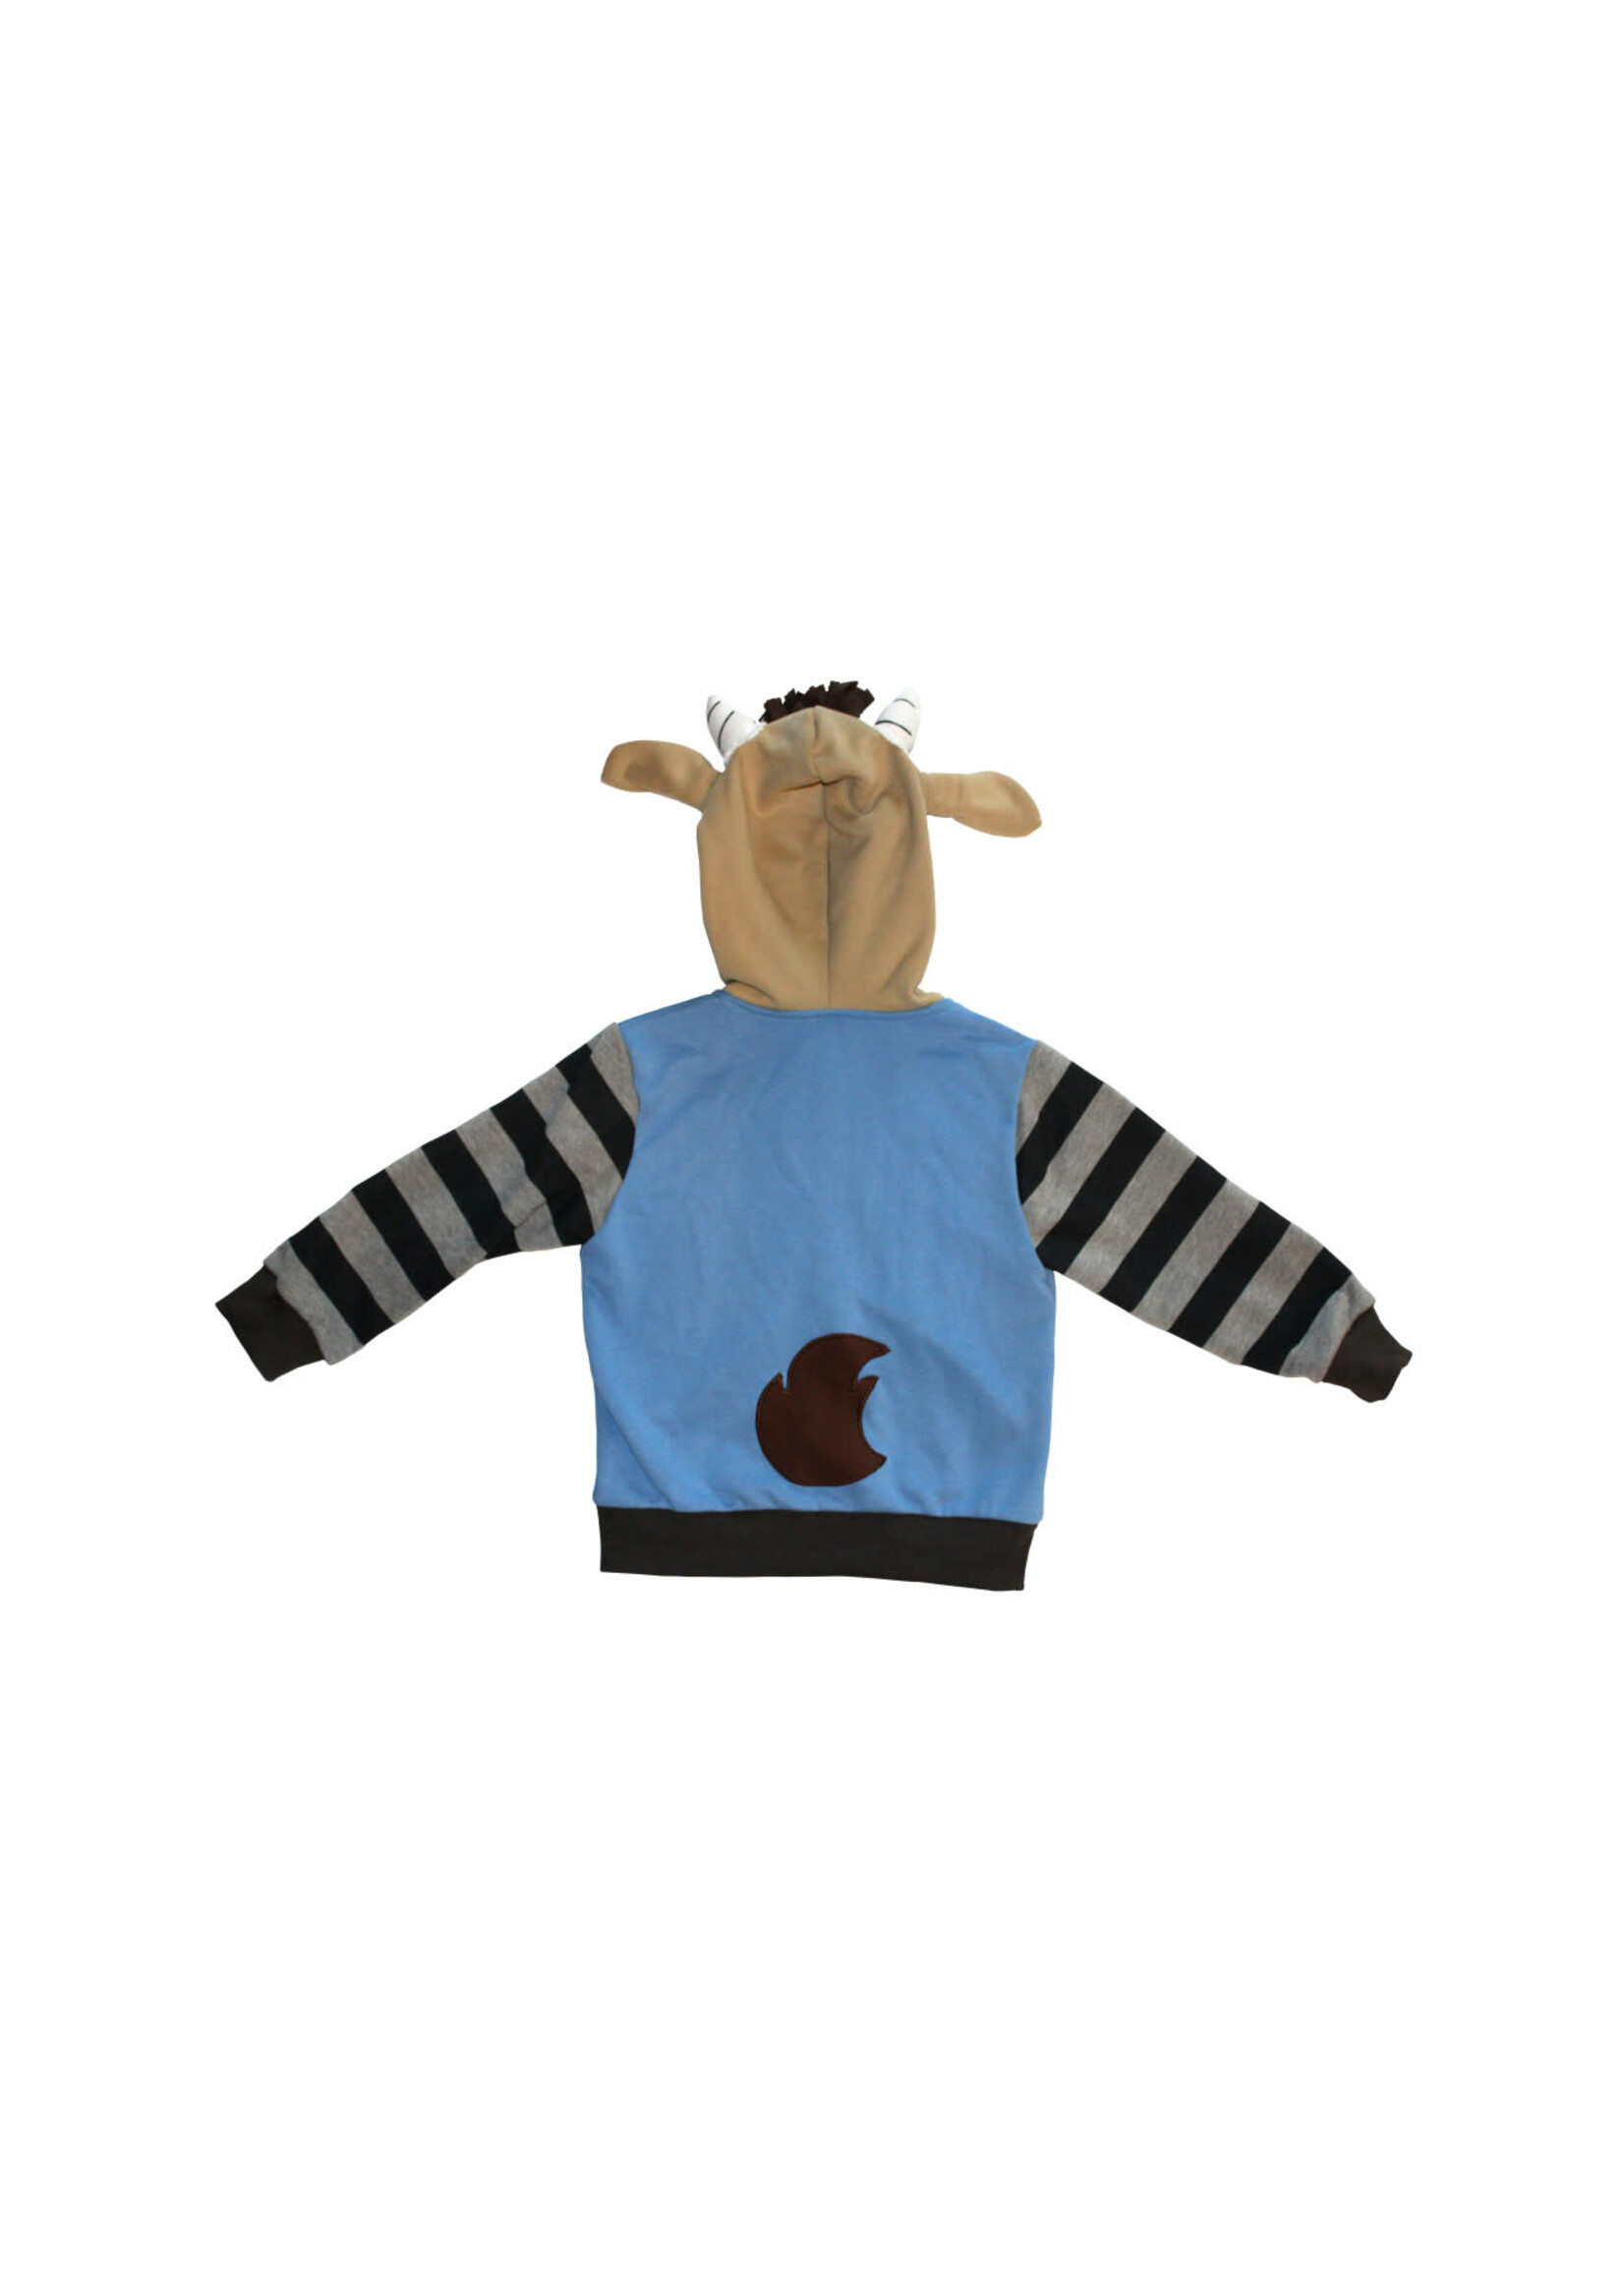 Billy the Goat 3D Hoodie